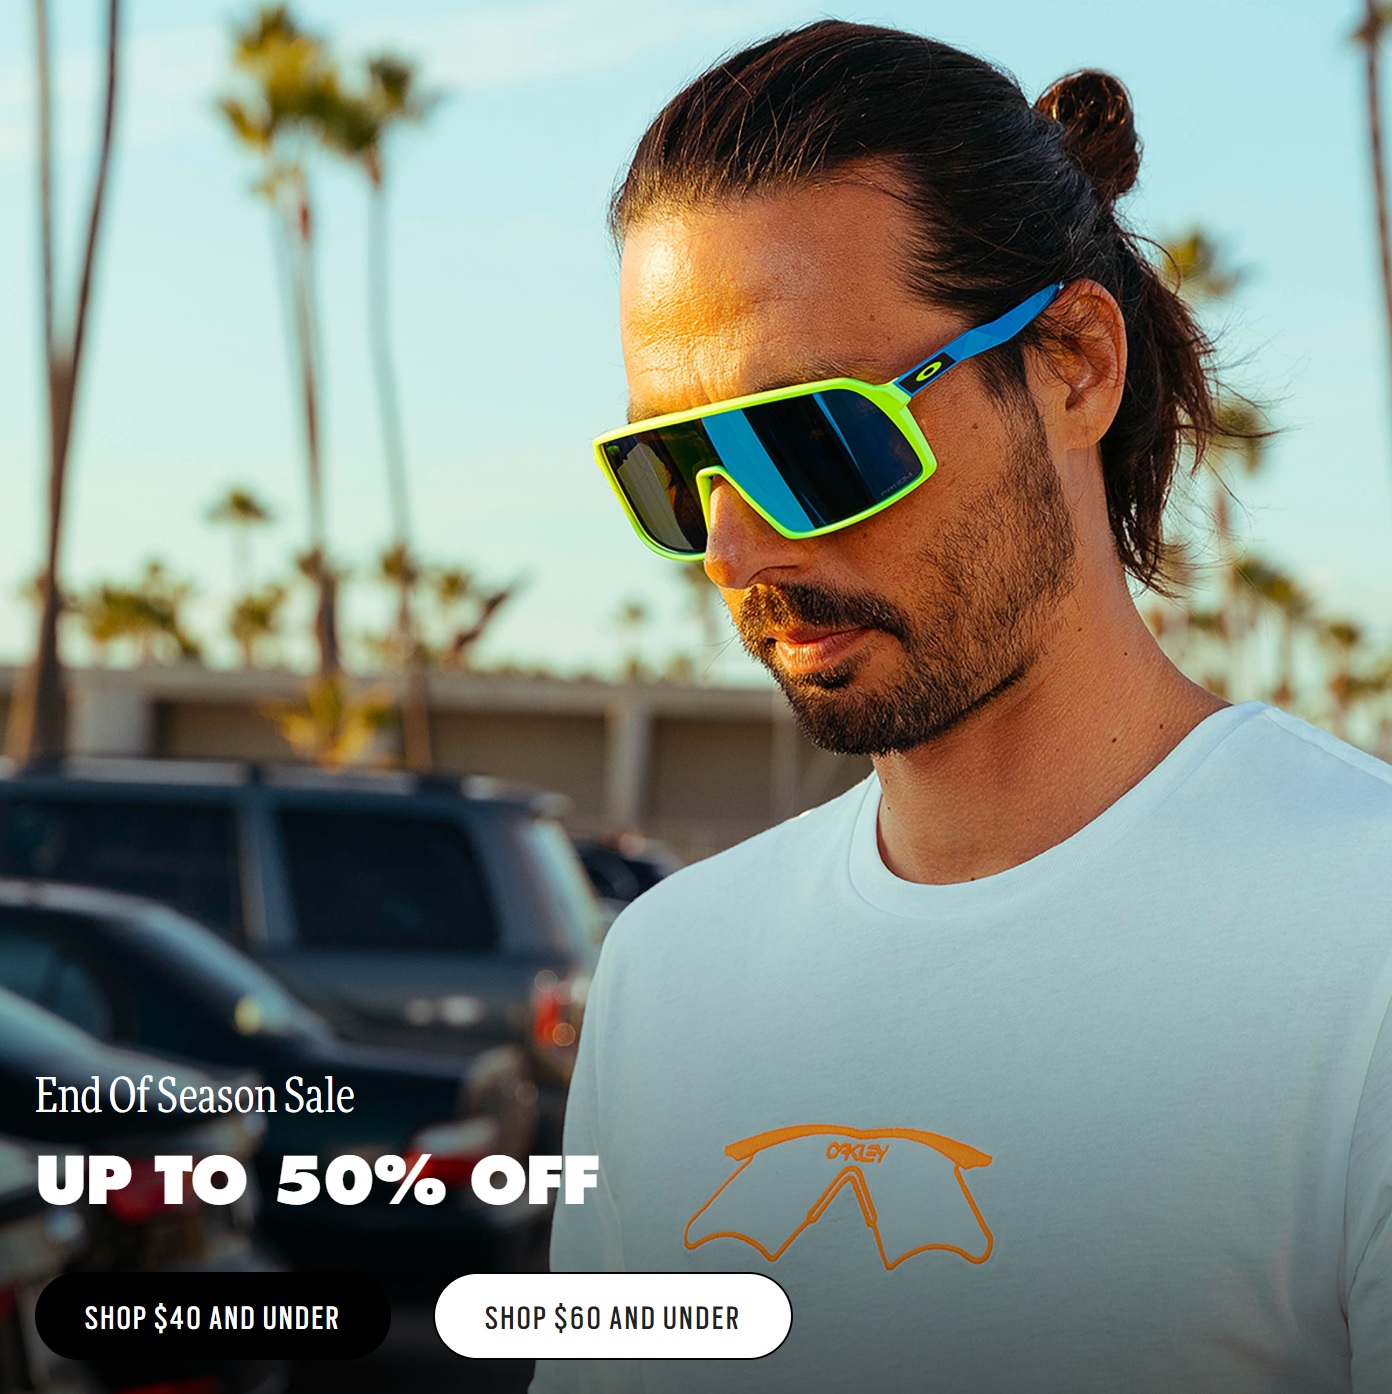 Oakley Canada Deals: FREE Shipping + Save 30% OFF Eyewear + Up to 50% OFF  Sale - Canadian Freebies, Coupons, Deals, Bargains, Flyers, Contests Canada  Canadian Freebies, Coupons, Deals, Bargains, Flyers, Contests Canada